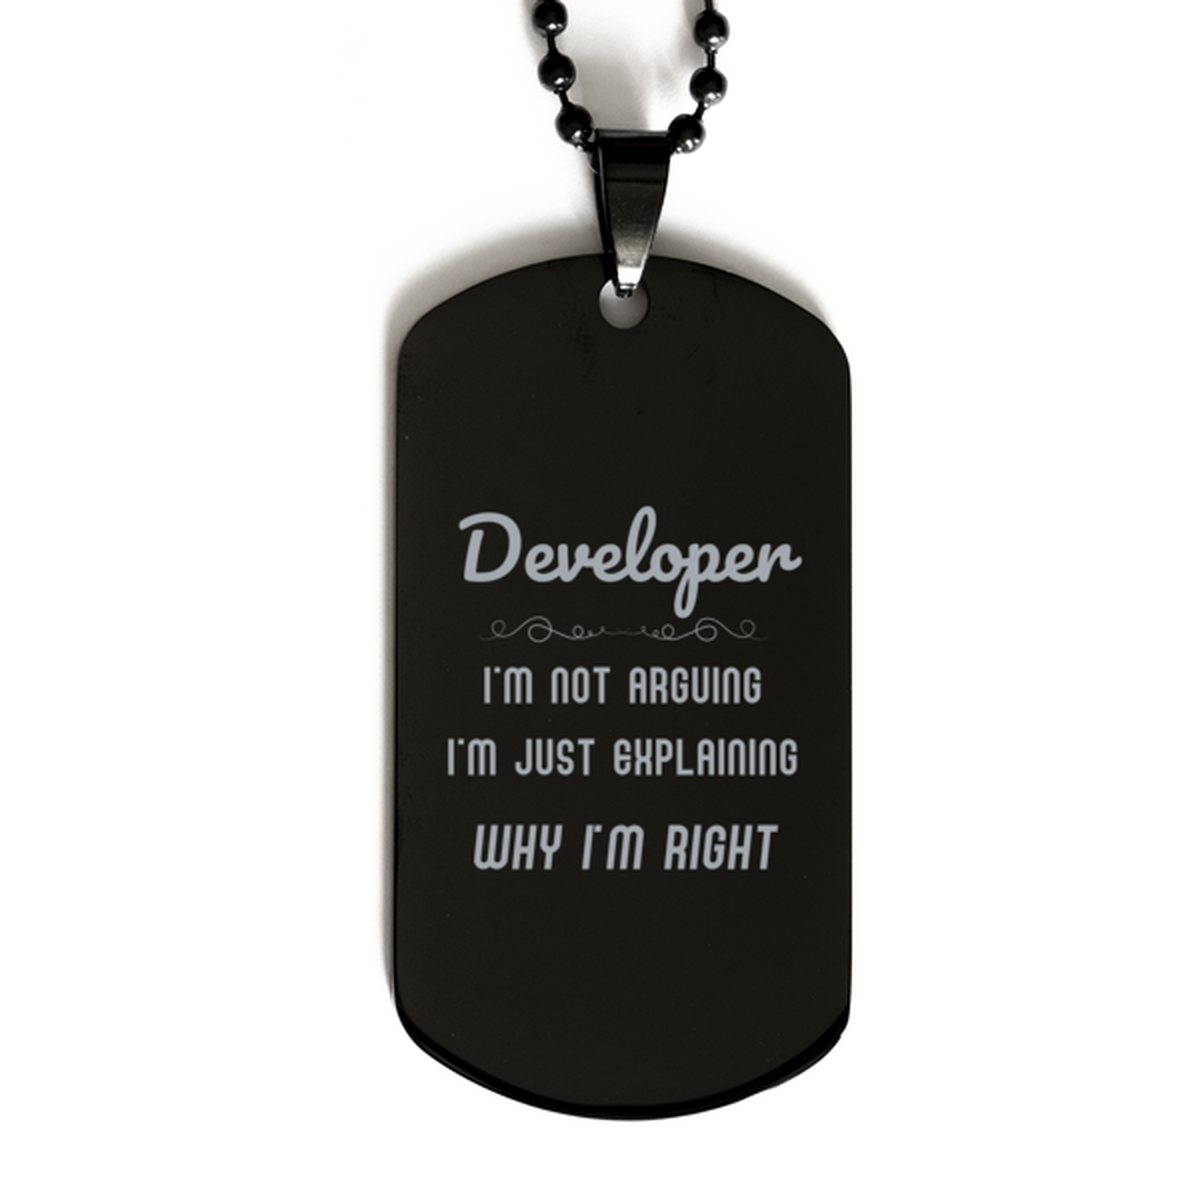 Developer I'm not Arguing. I'm Just Explaining Why I'm RIGHT Black Dog Tag, Funny Saying Quote Developer Gifts For Developer Graduation Birthday Christmas Gifts for Men Women Coworker